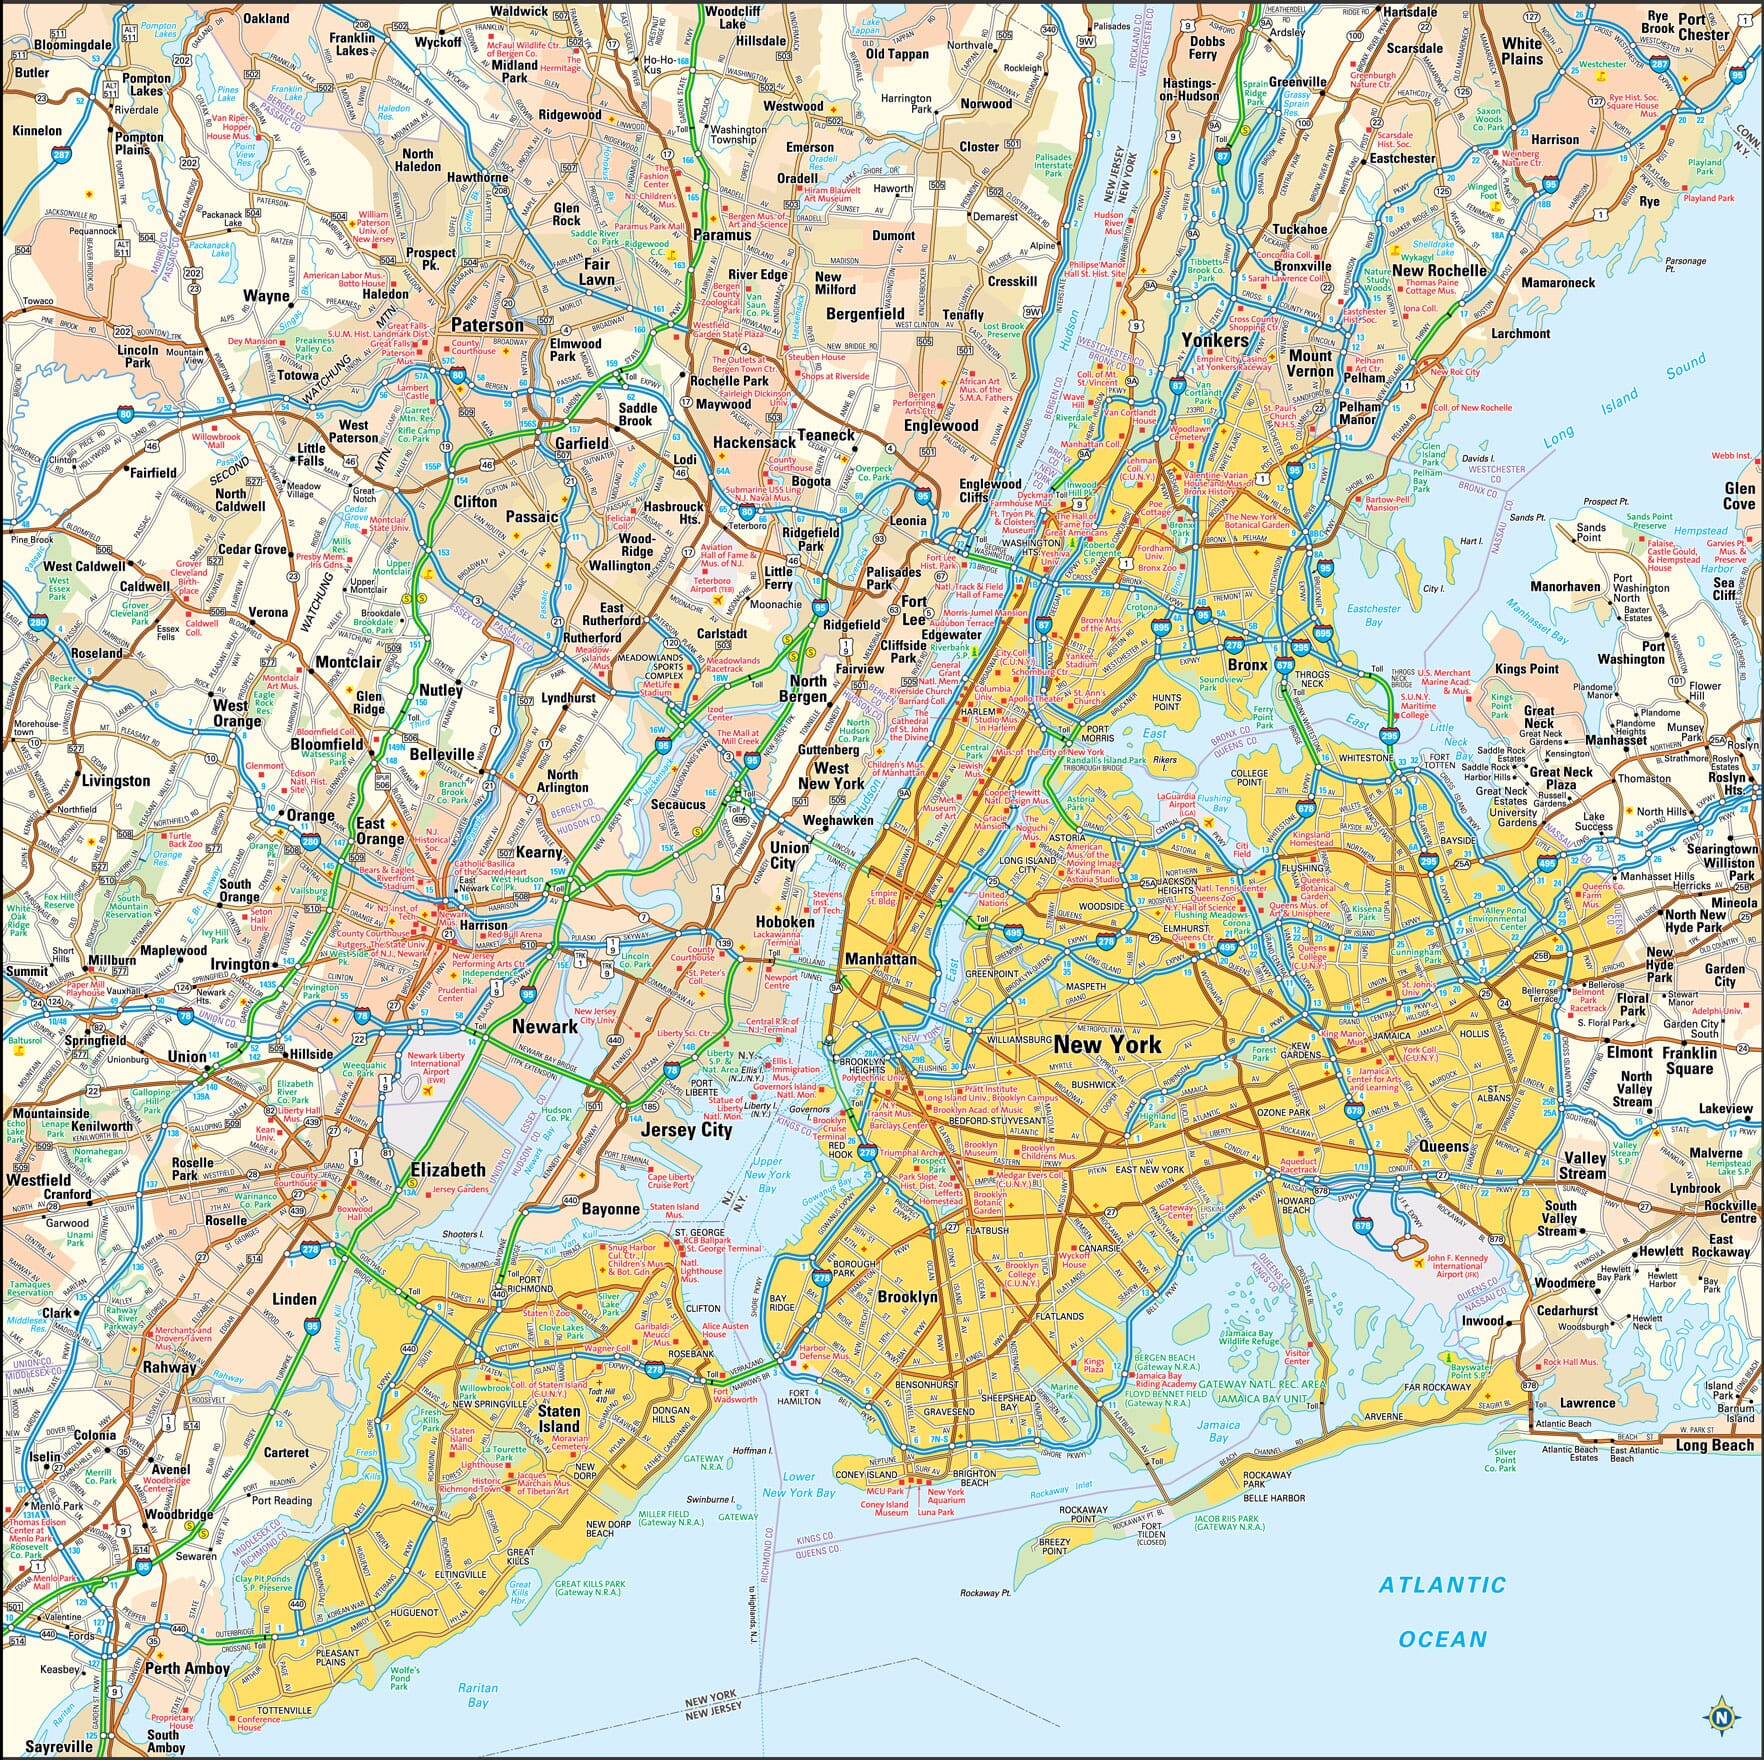 new york city is located in the southeastern part of new york state just east of new jersey